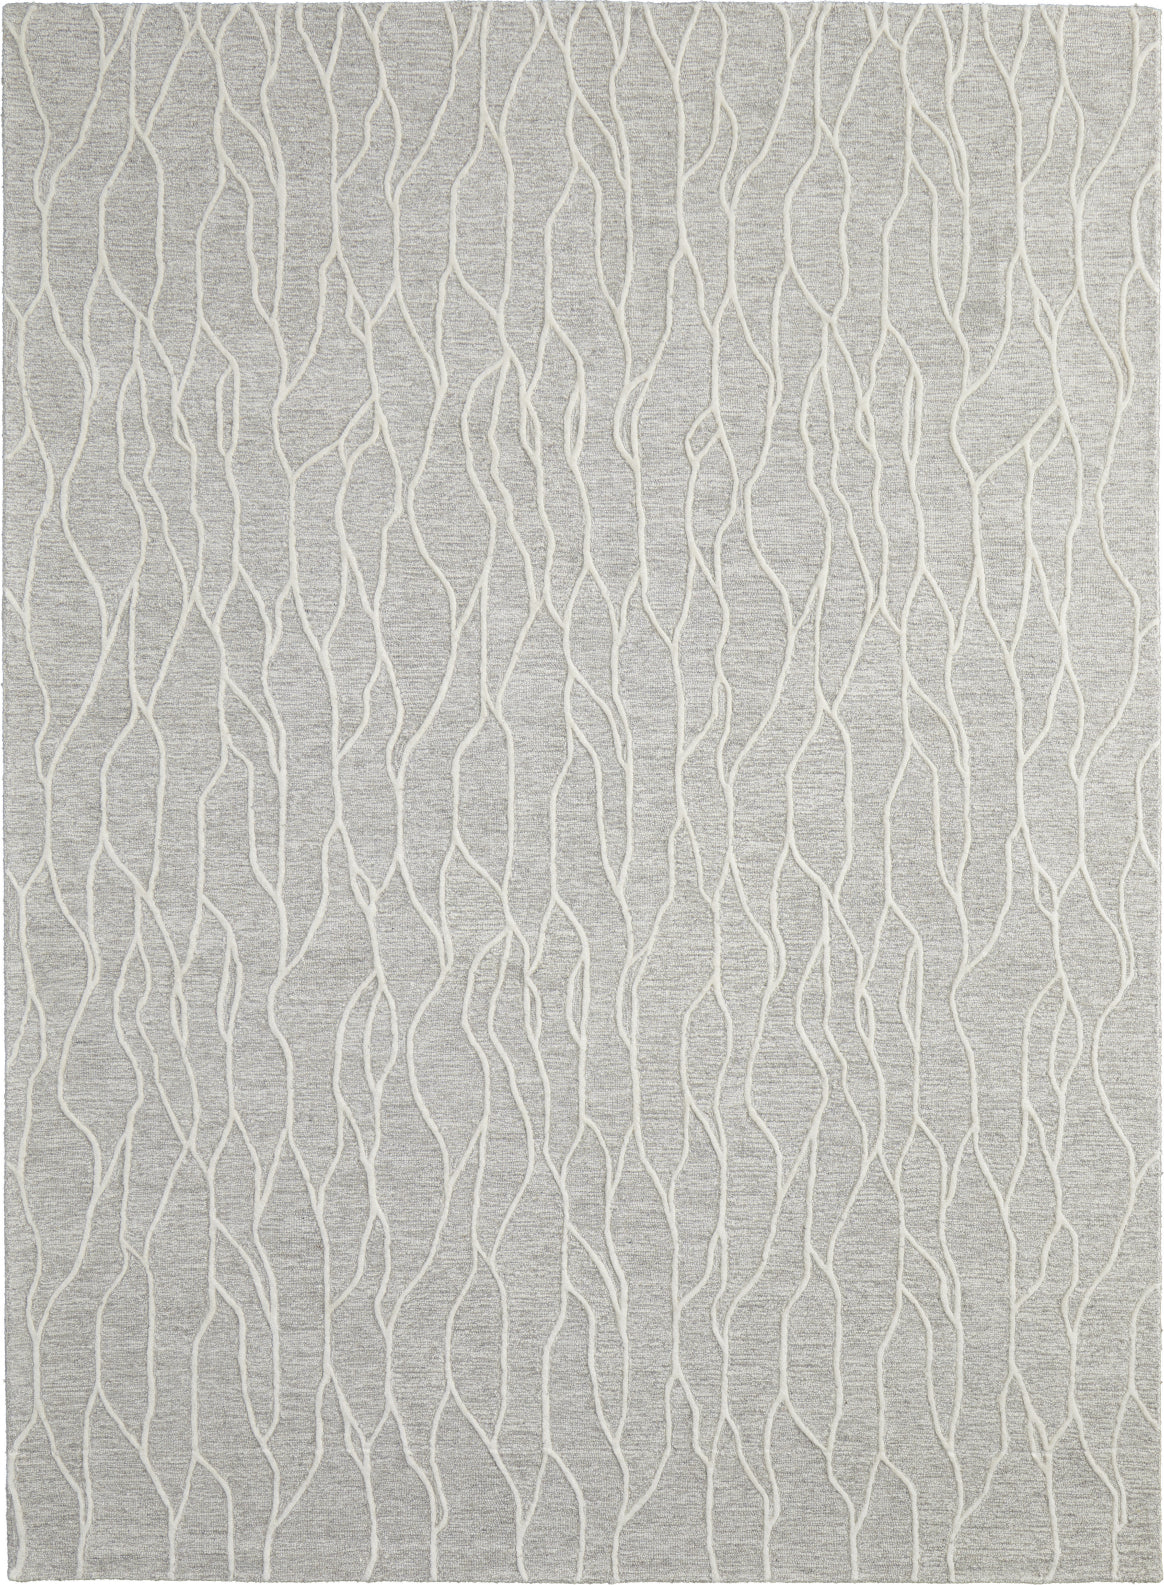 Feizy Enzo 8734F Taupe/Ivory Area Rug main image